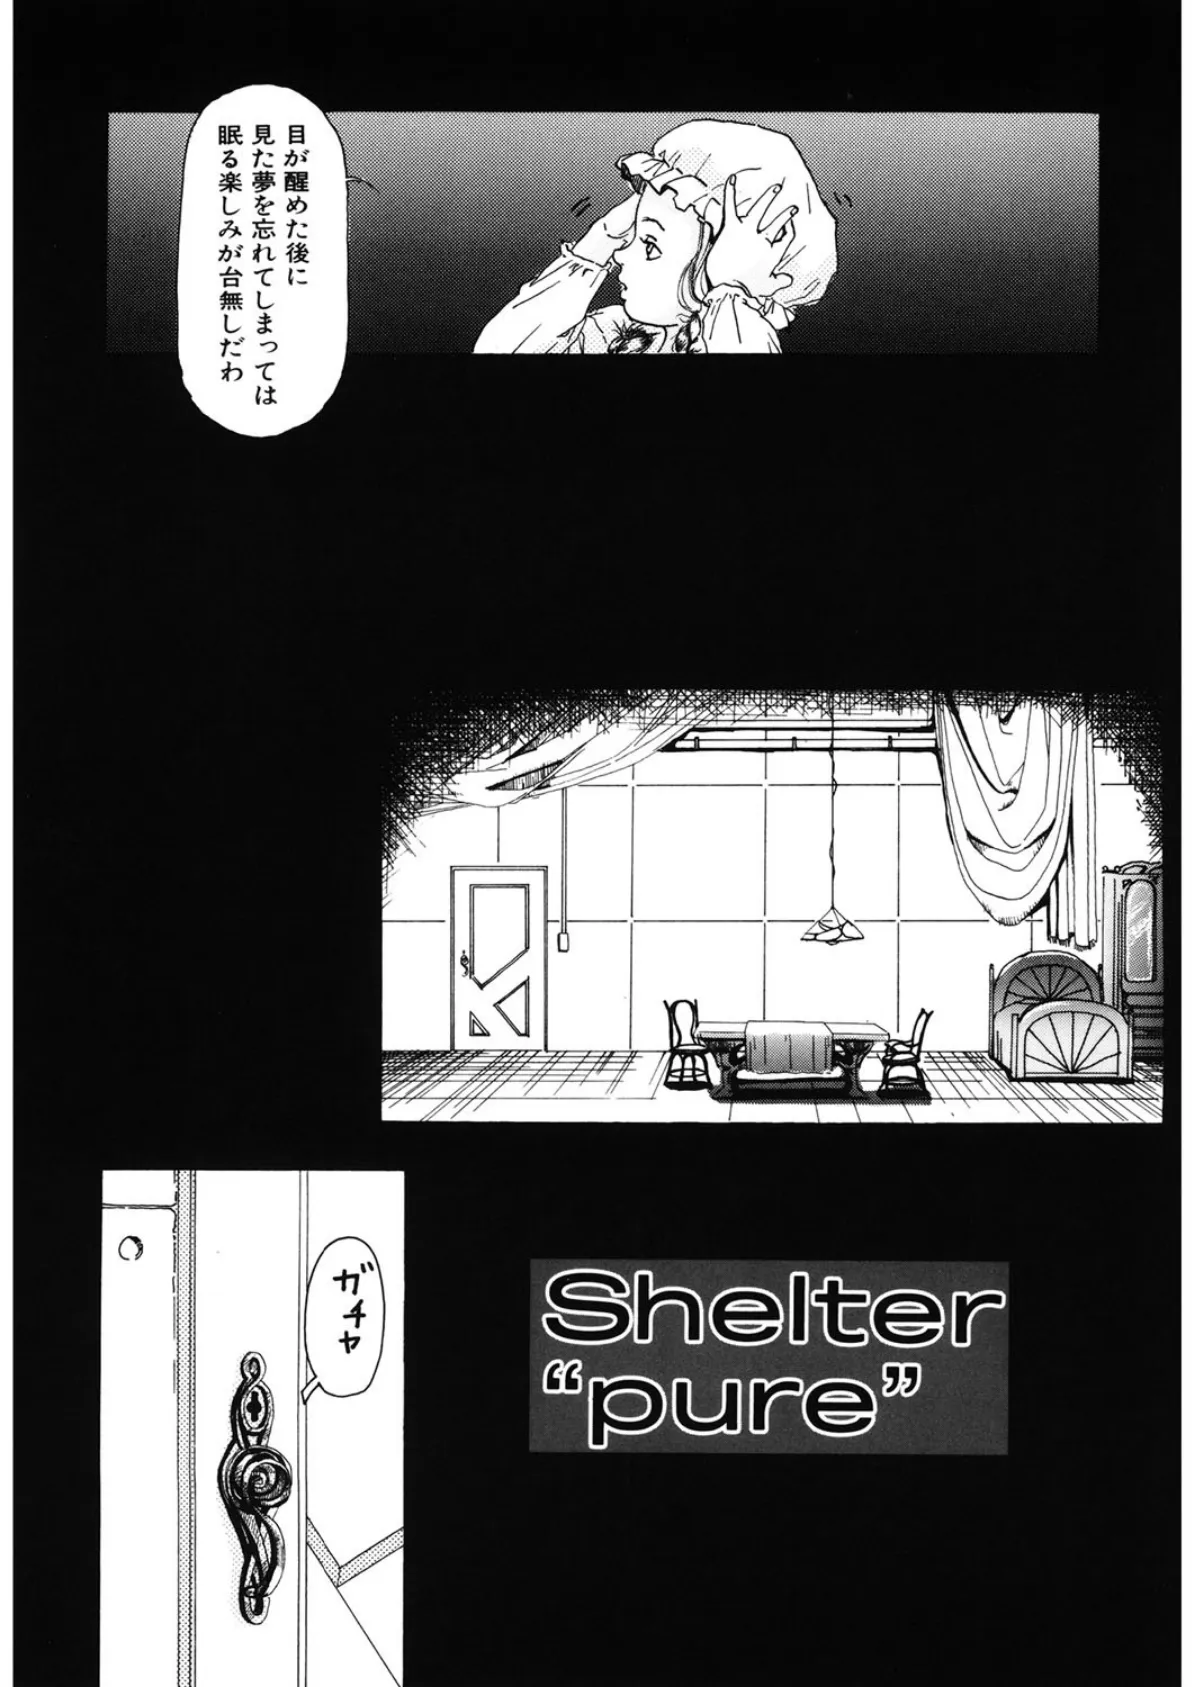 Shelter‘pure’